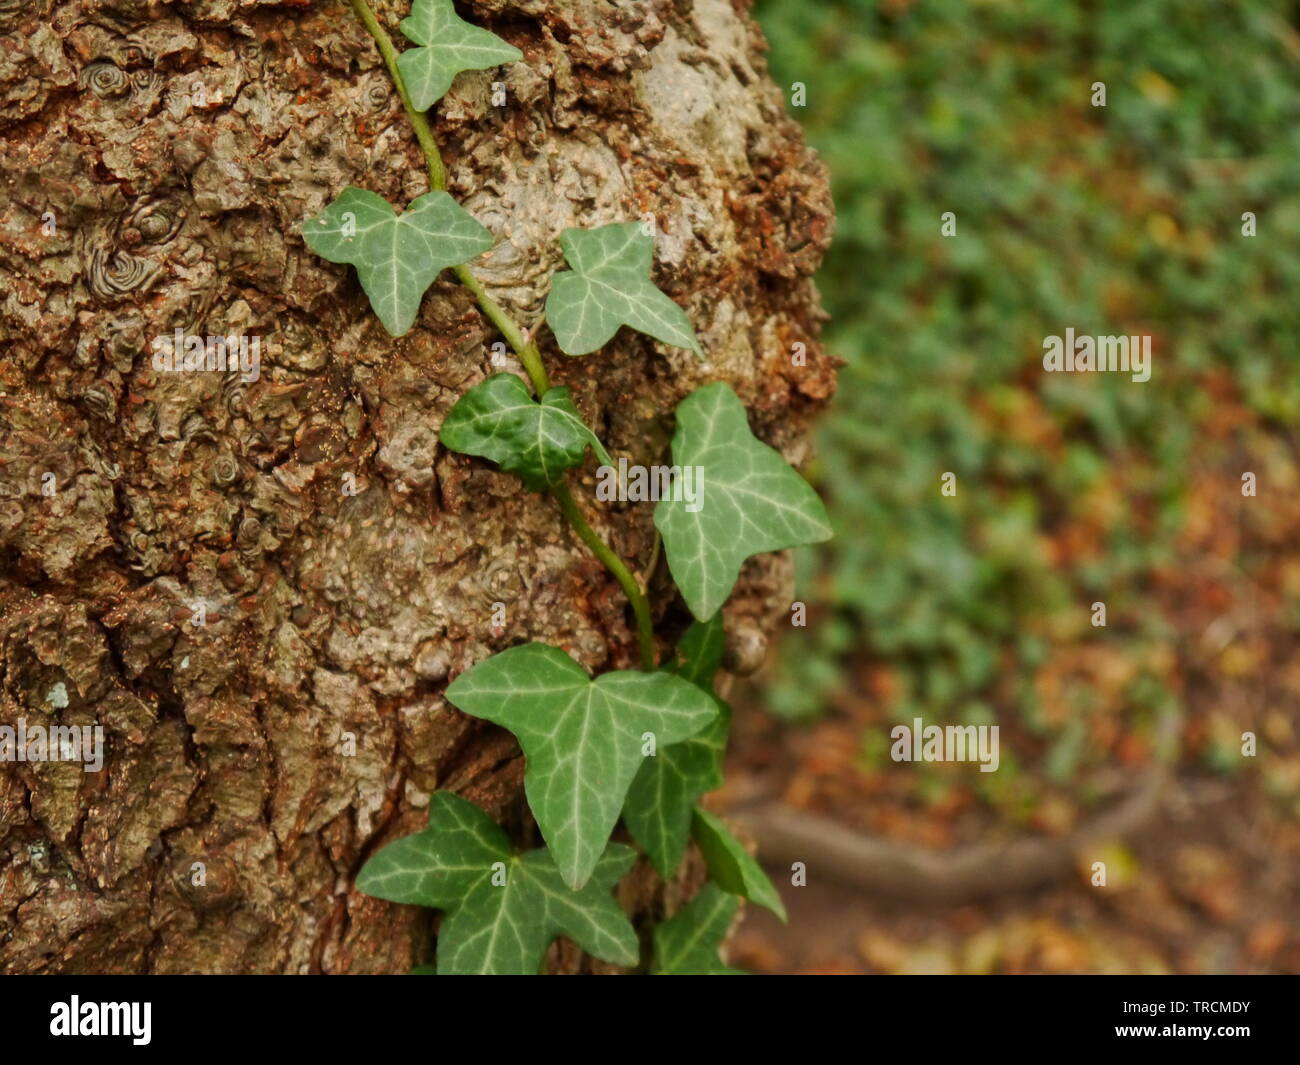 A close up photo of a tree trunk with on ivy tendril. Stock Photo